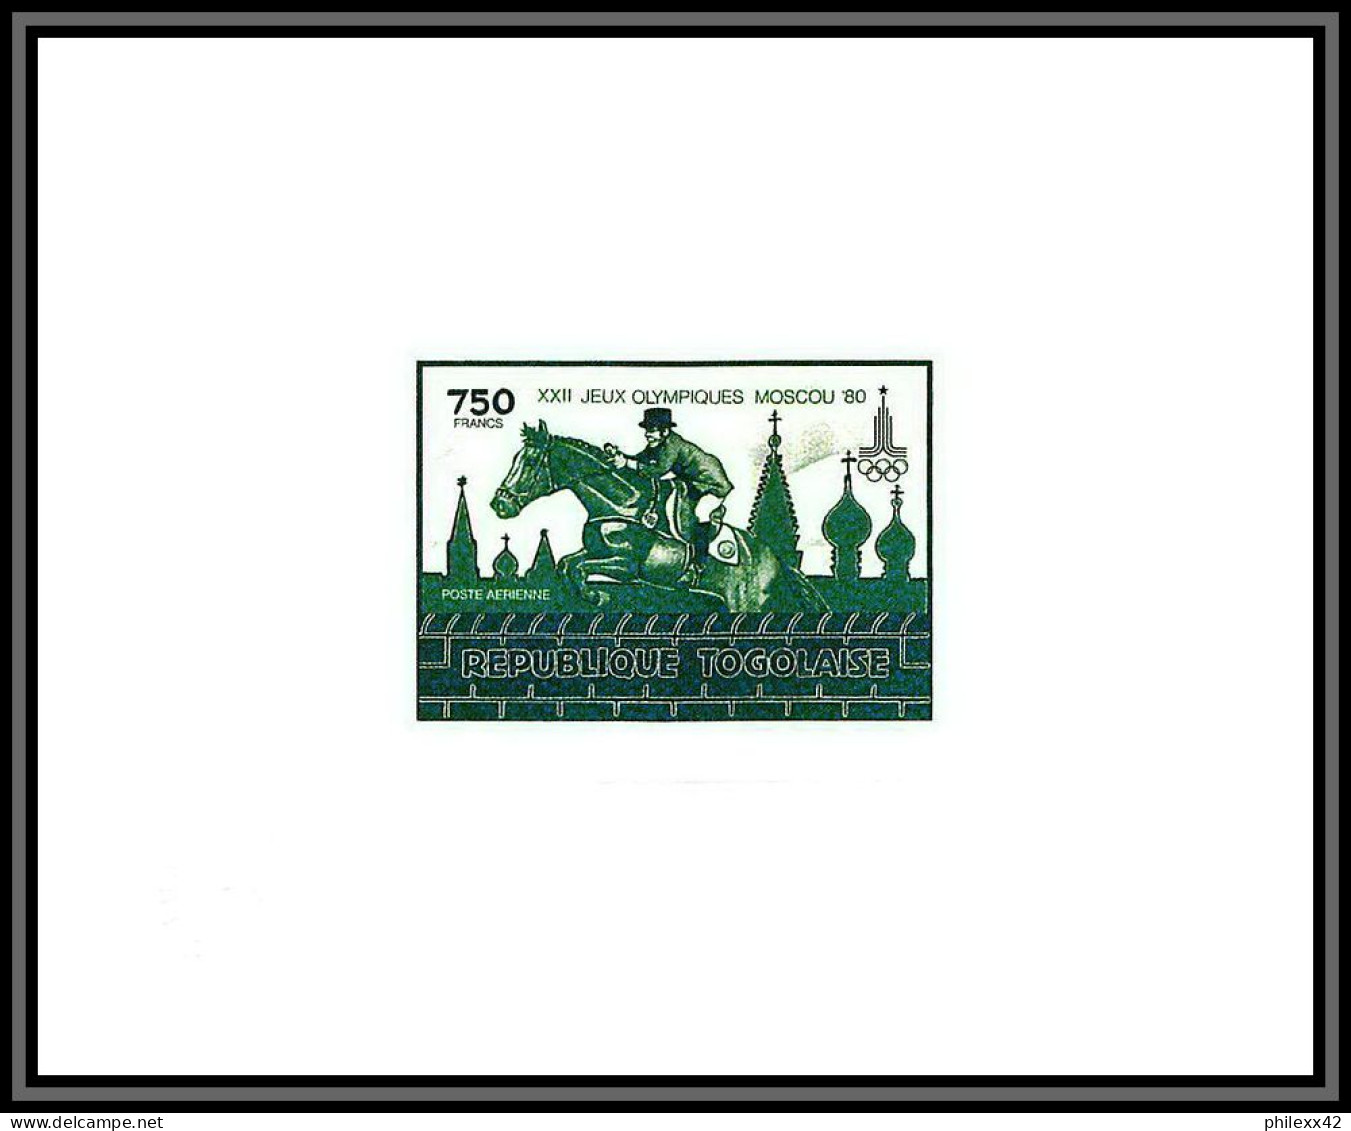 95354 N°156 Jumping Cheval Horse Moscou 1980 Jeux Olympiques Olympic Games Togo Epreuve D'artiste Artist Proof Green - Summer 1980: Moscow